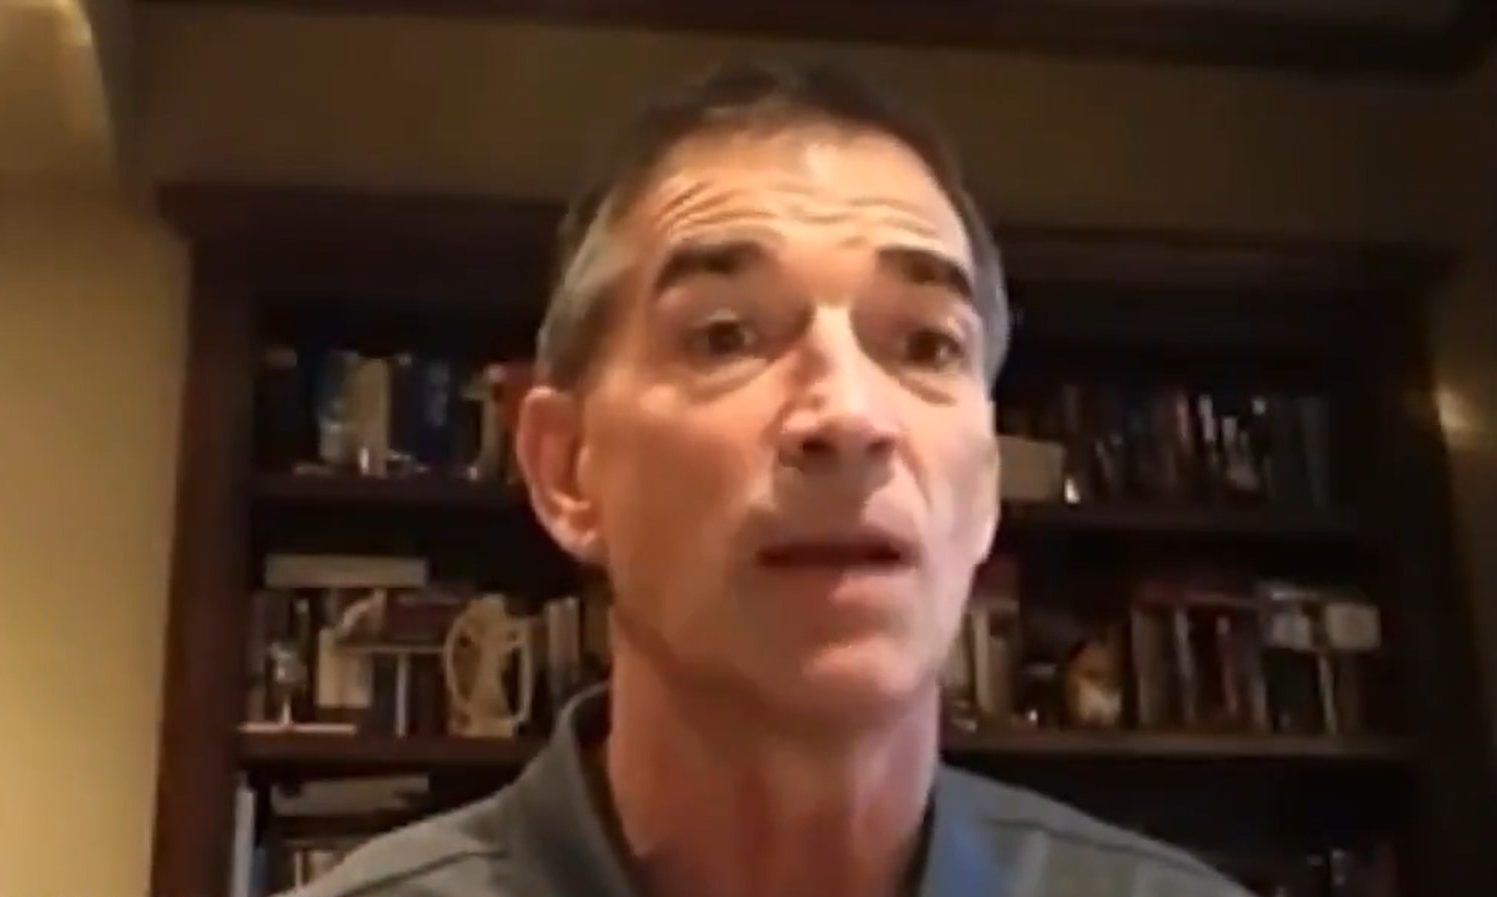 Ex-Jazz star John Stockton was reluctant about appearing in